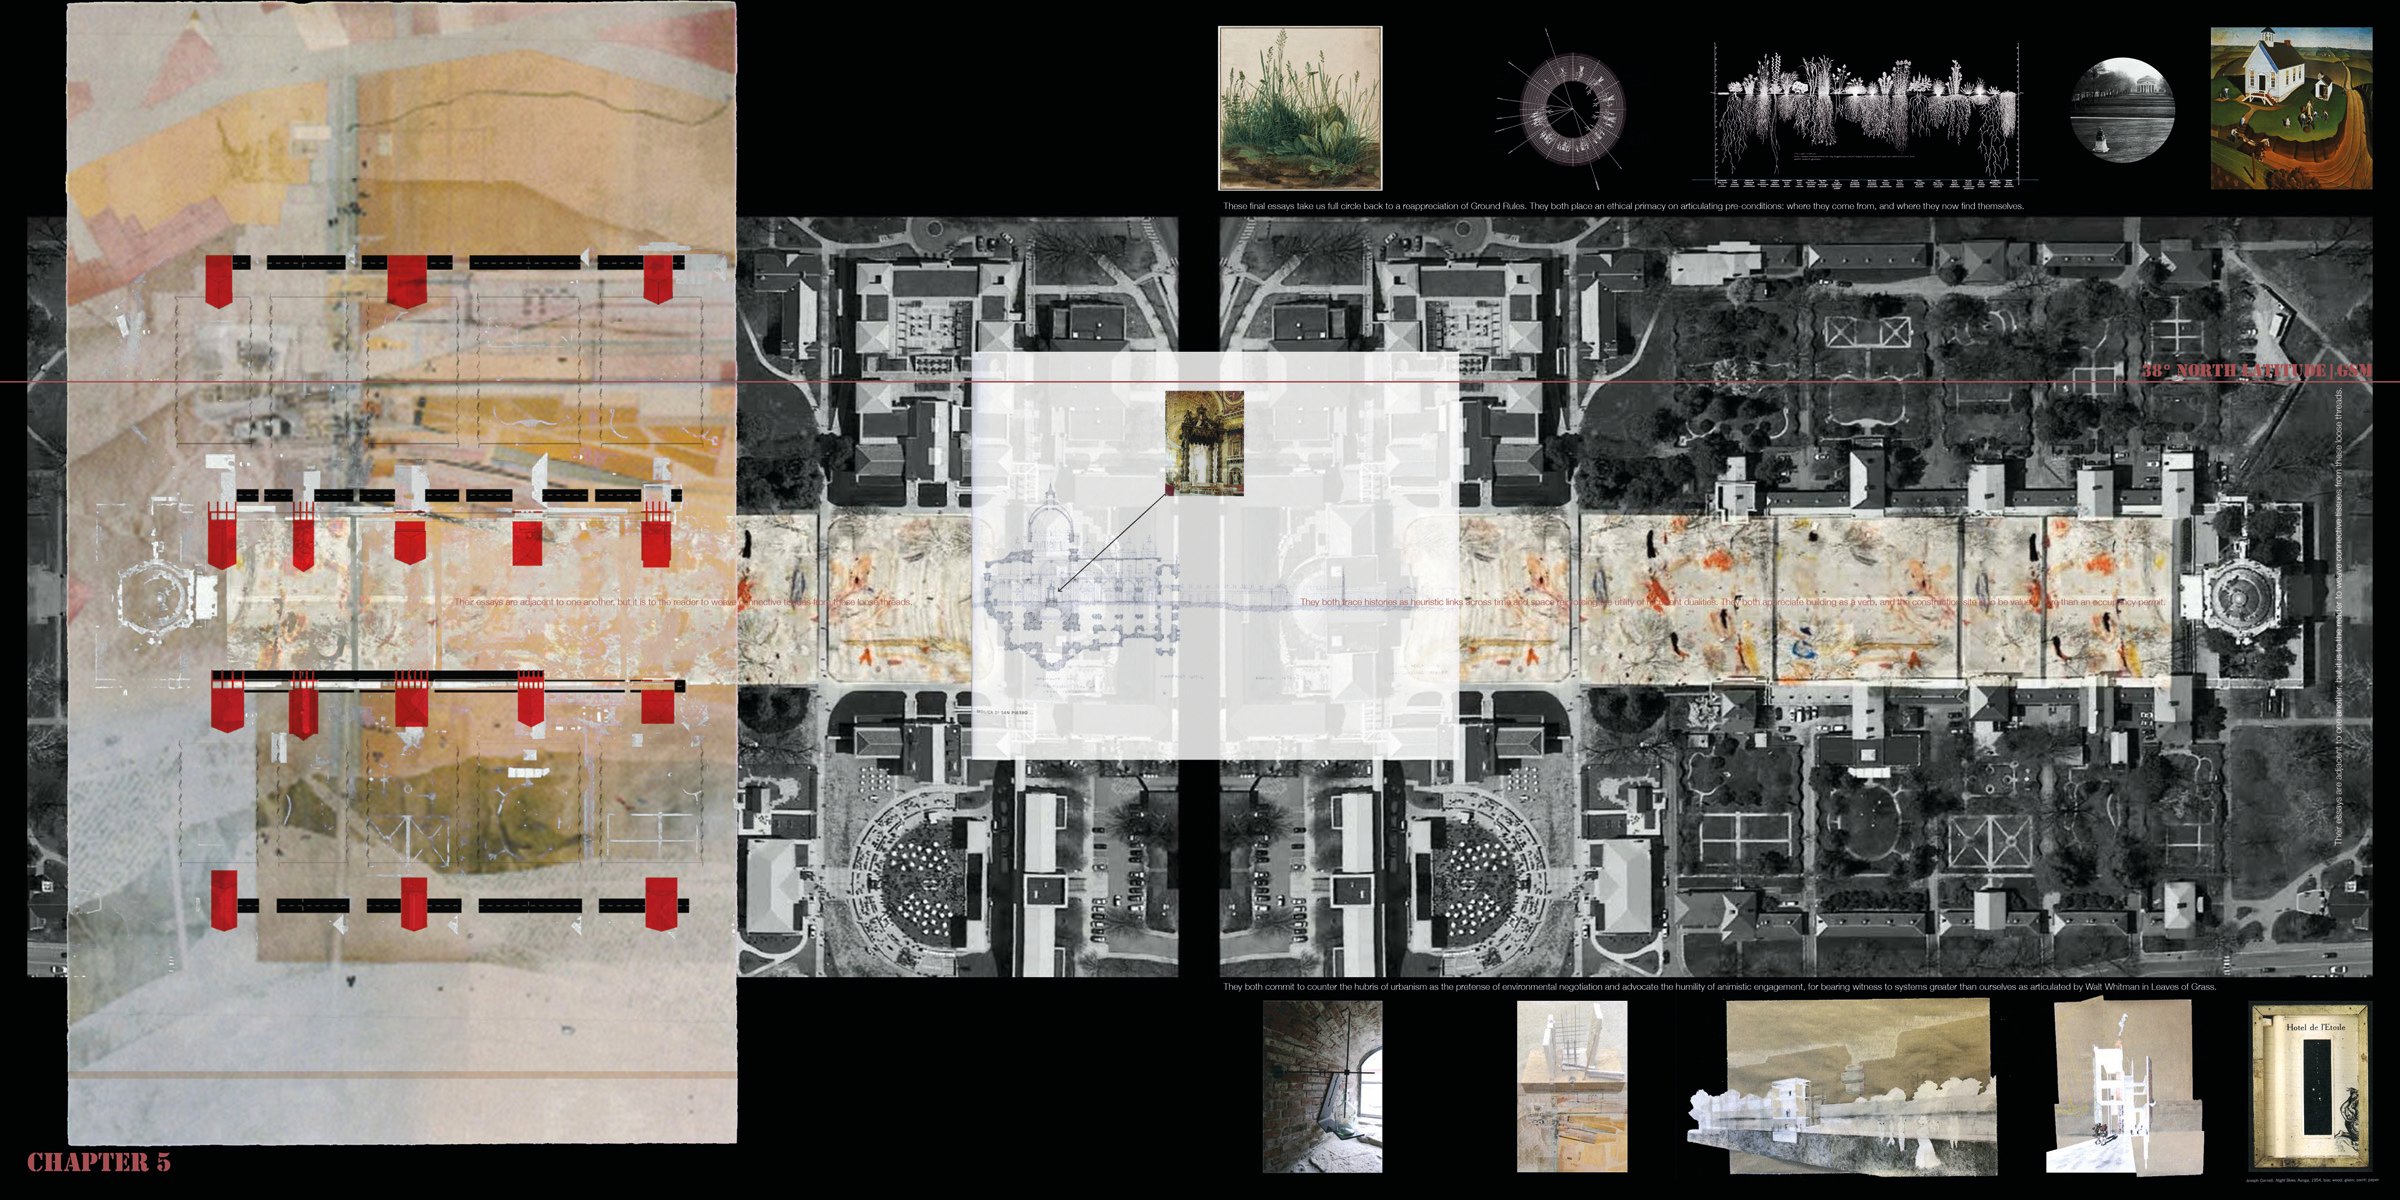 Aerial photograph of building with landscape, transparent drawing of shovel digging land on top, Connective Tissues Ten Essays by University Virginia Kenan Fellows 2001-2016 in yellow font above.